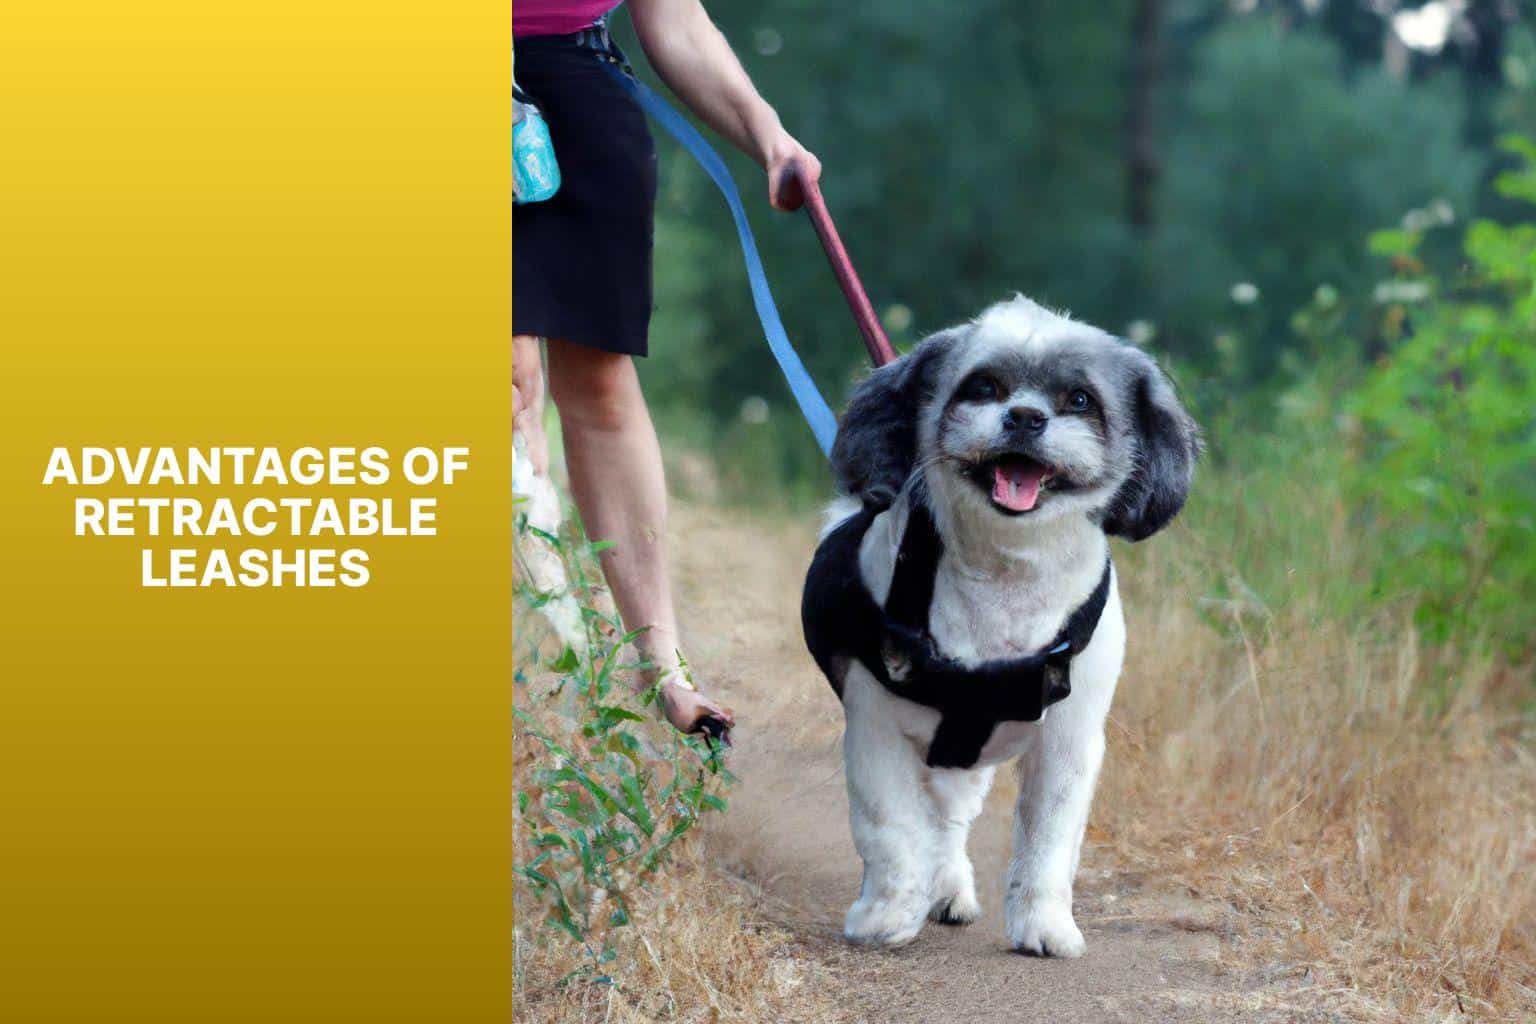 Advantages of Retractable Leashes - Why Do Dog Owners Use Retractable Leashes 